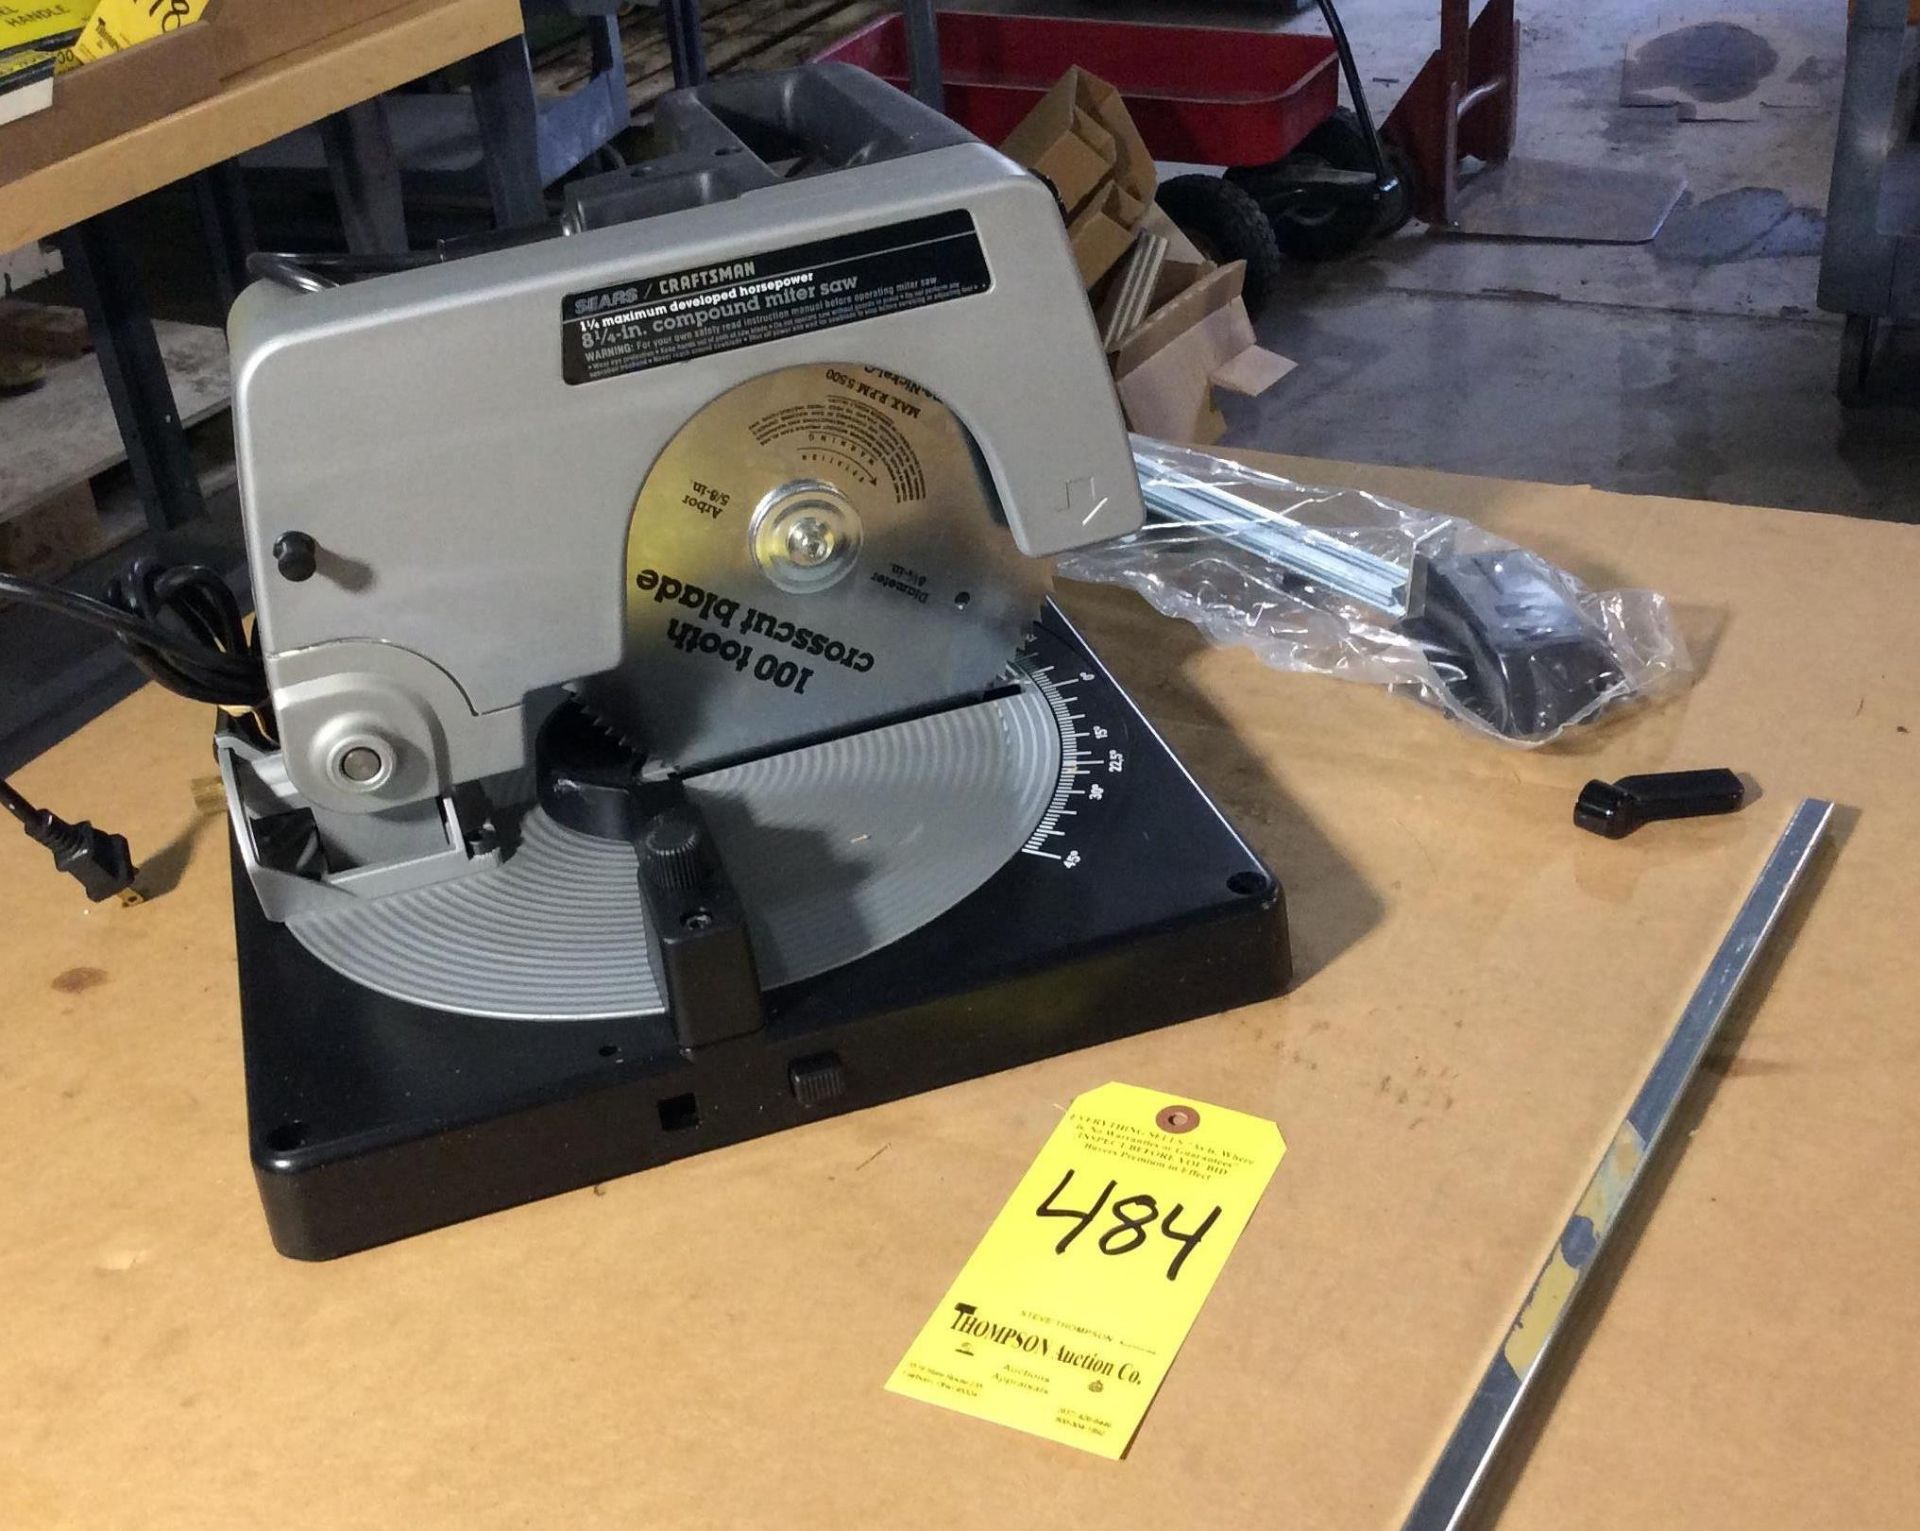 Sears 8 1/4 Inch Compound Mitre Saw, 1 1/4 HP